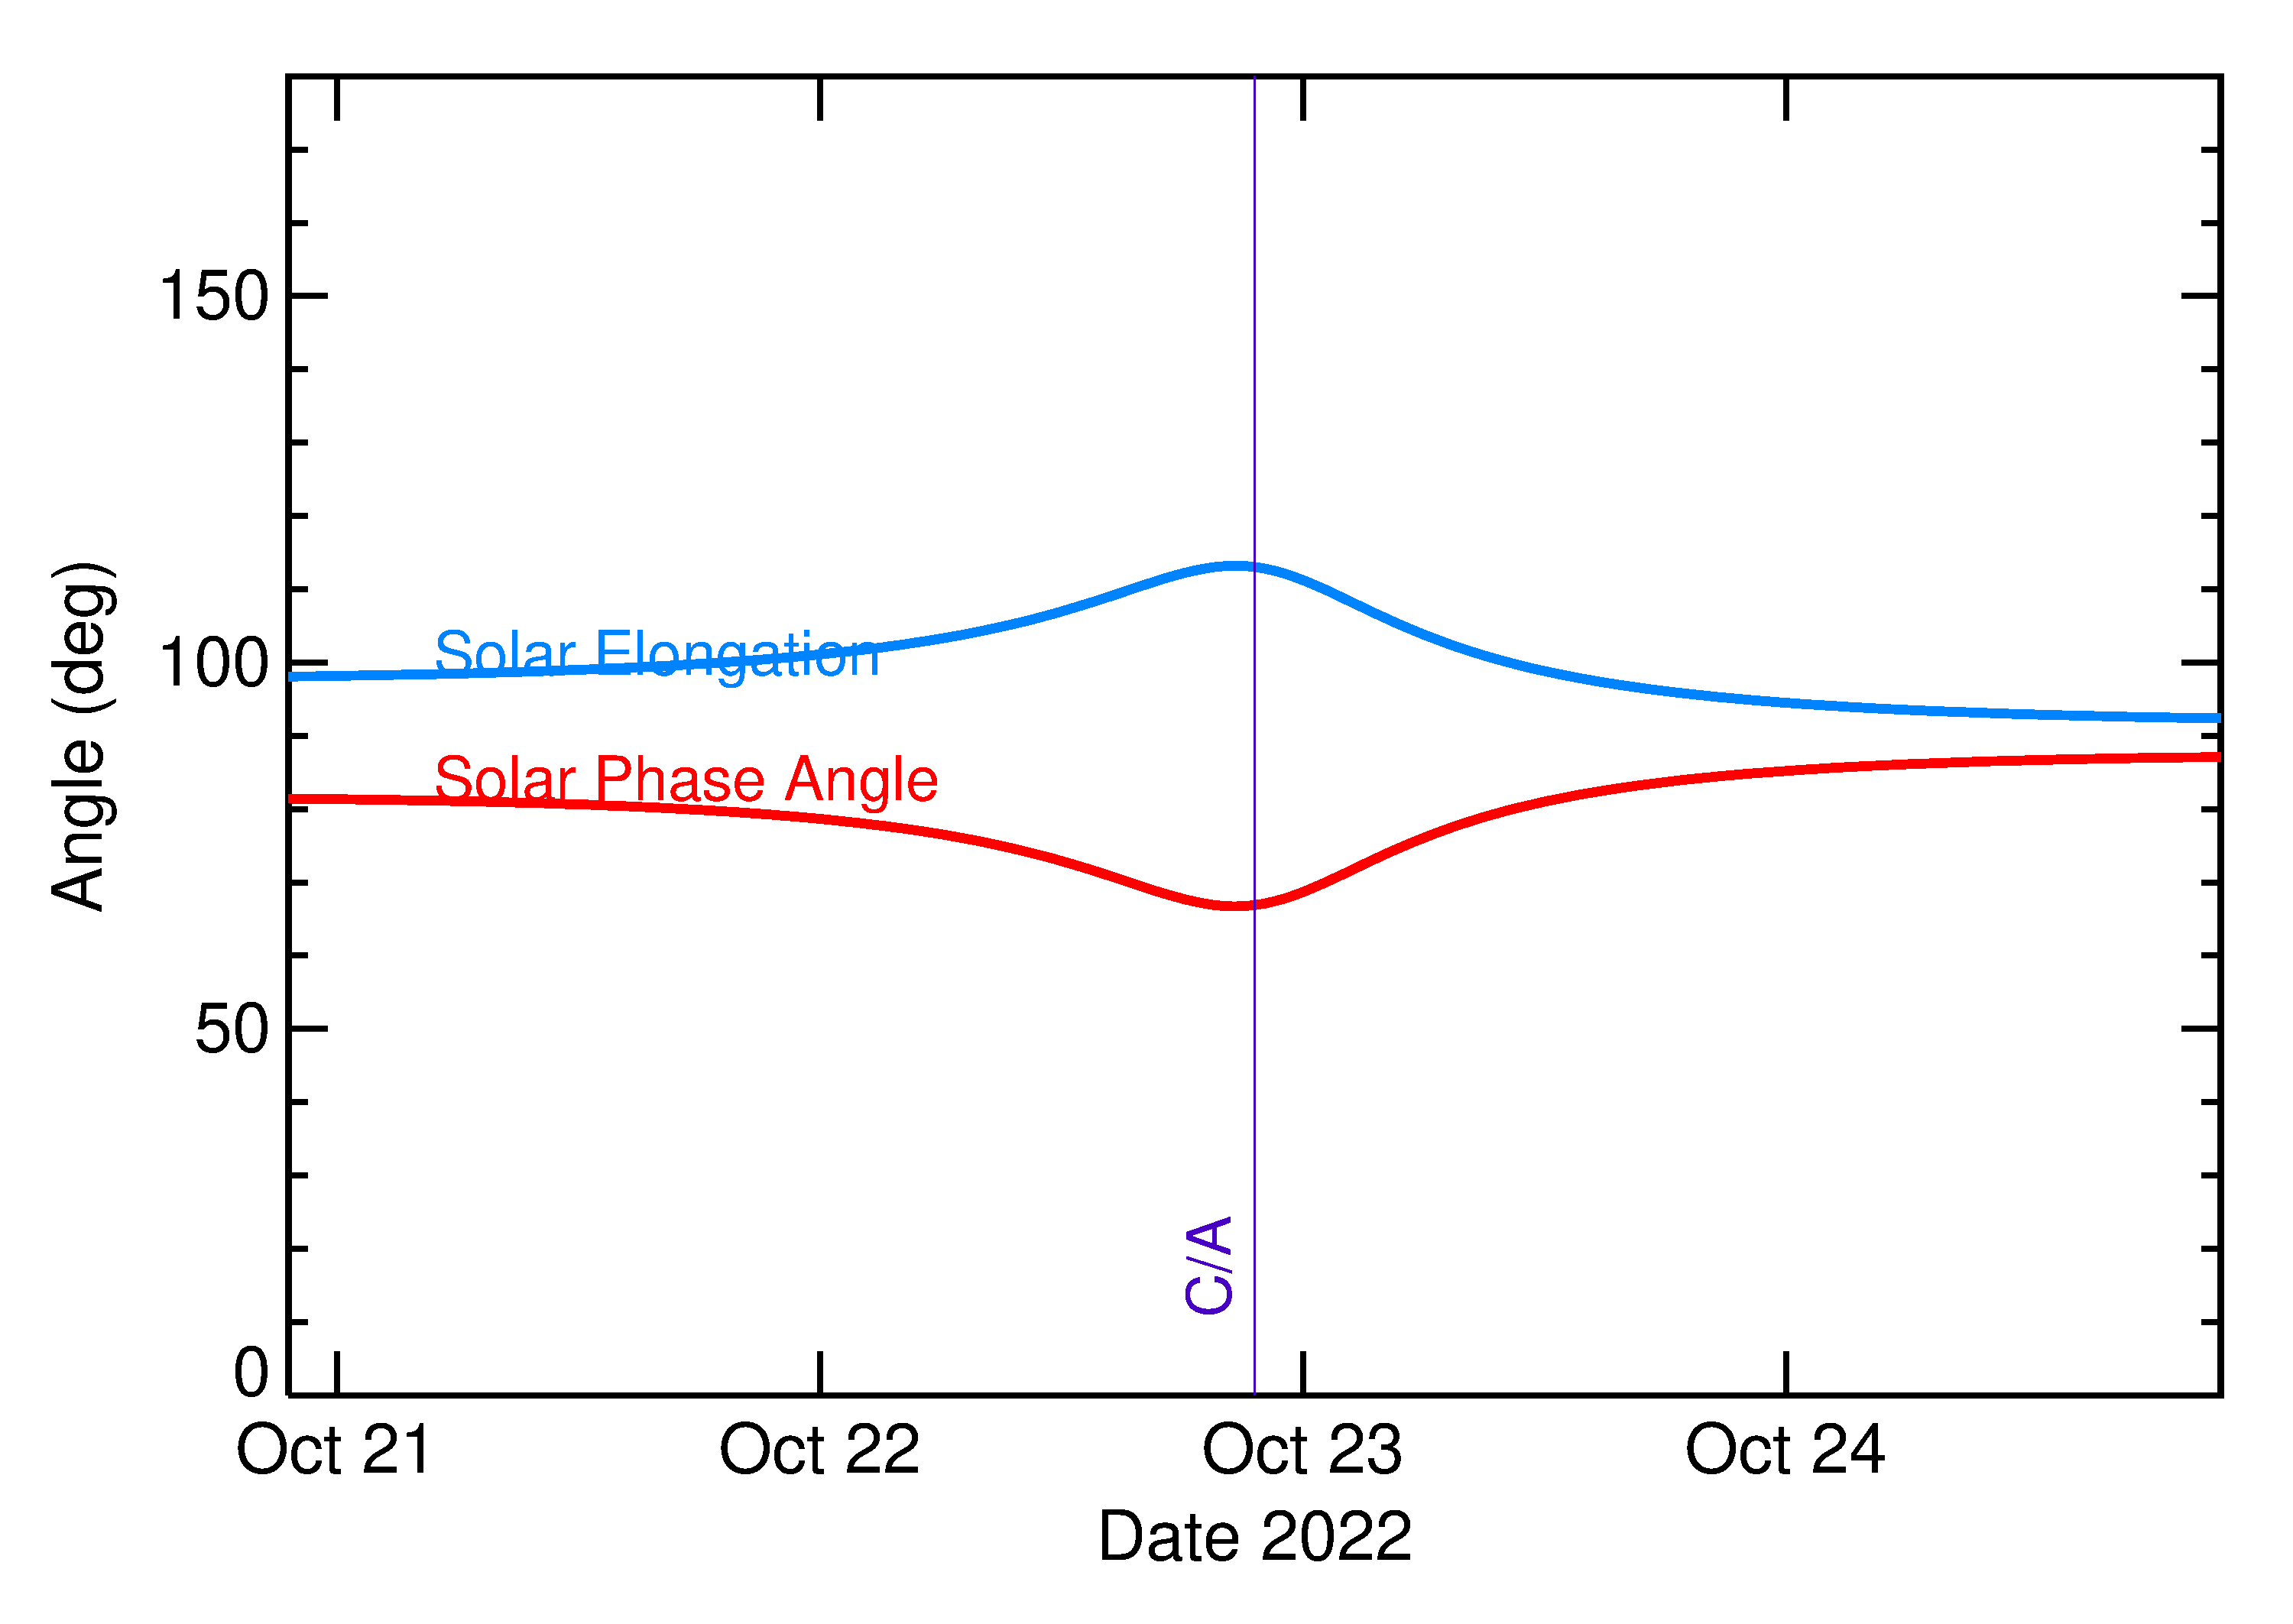 Solar Elongation and Solar Phase Angle of 2022 UY5 in the days around closest approach